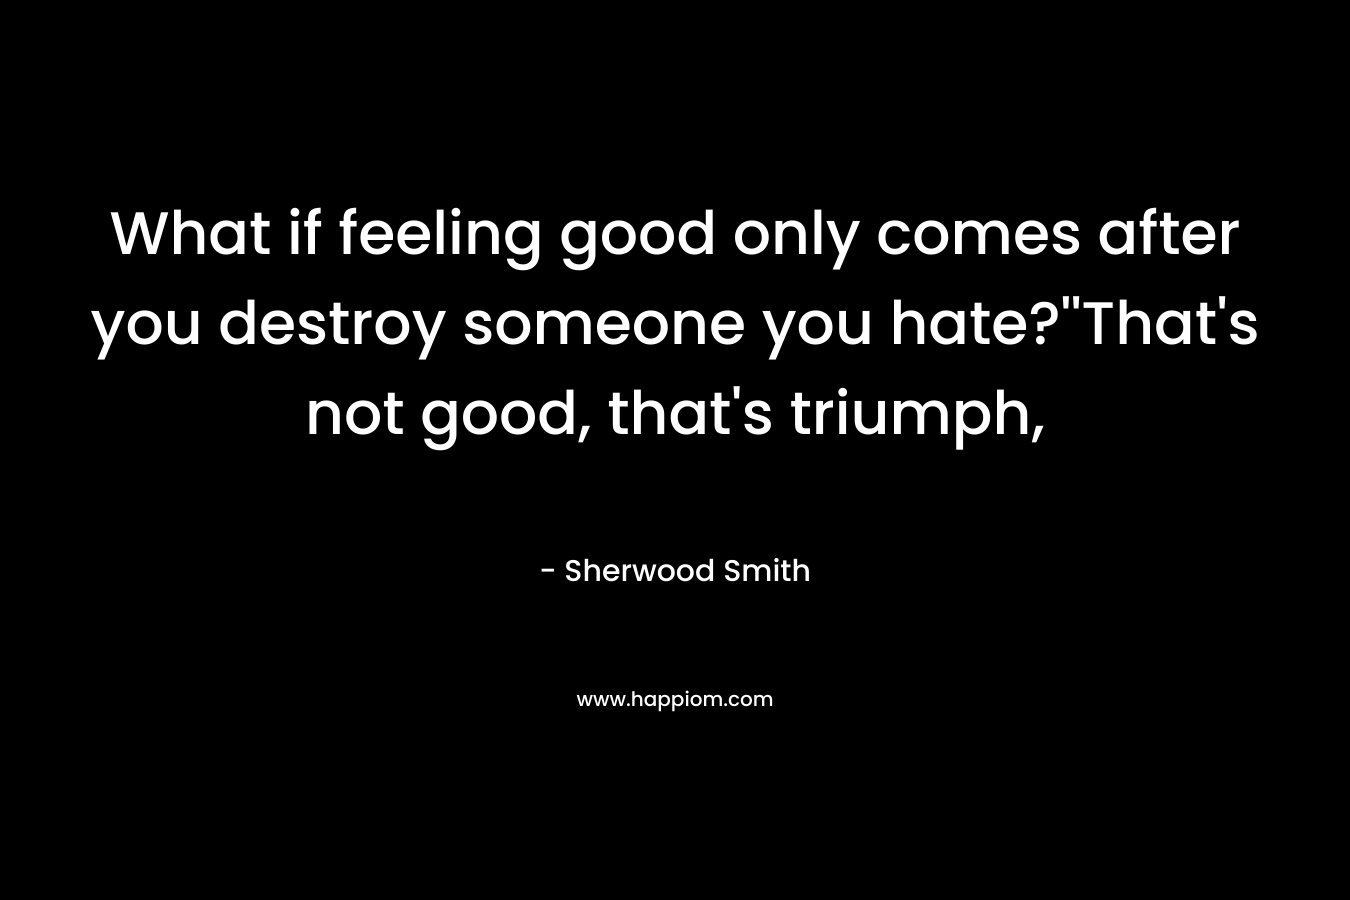 What if feeling good only comes after you destroy someone you hate?”That’s not good, that’s triumph, – Sherwood Smith